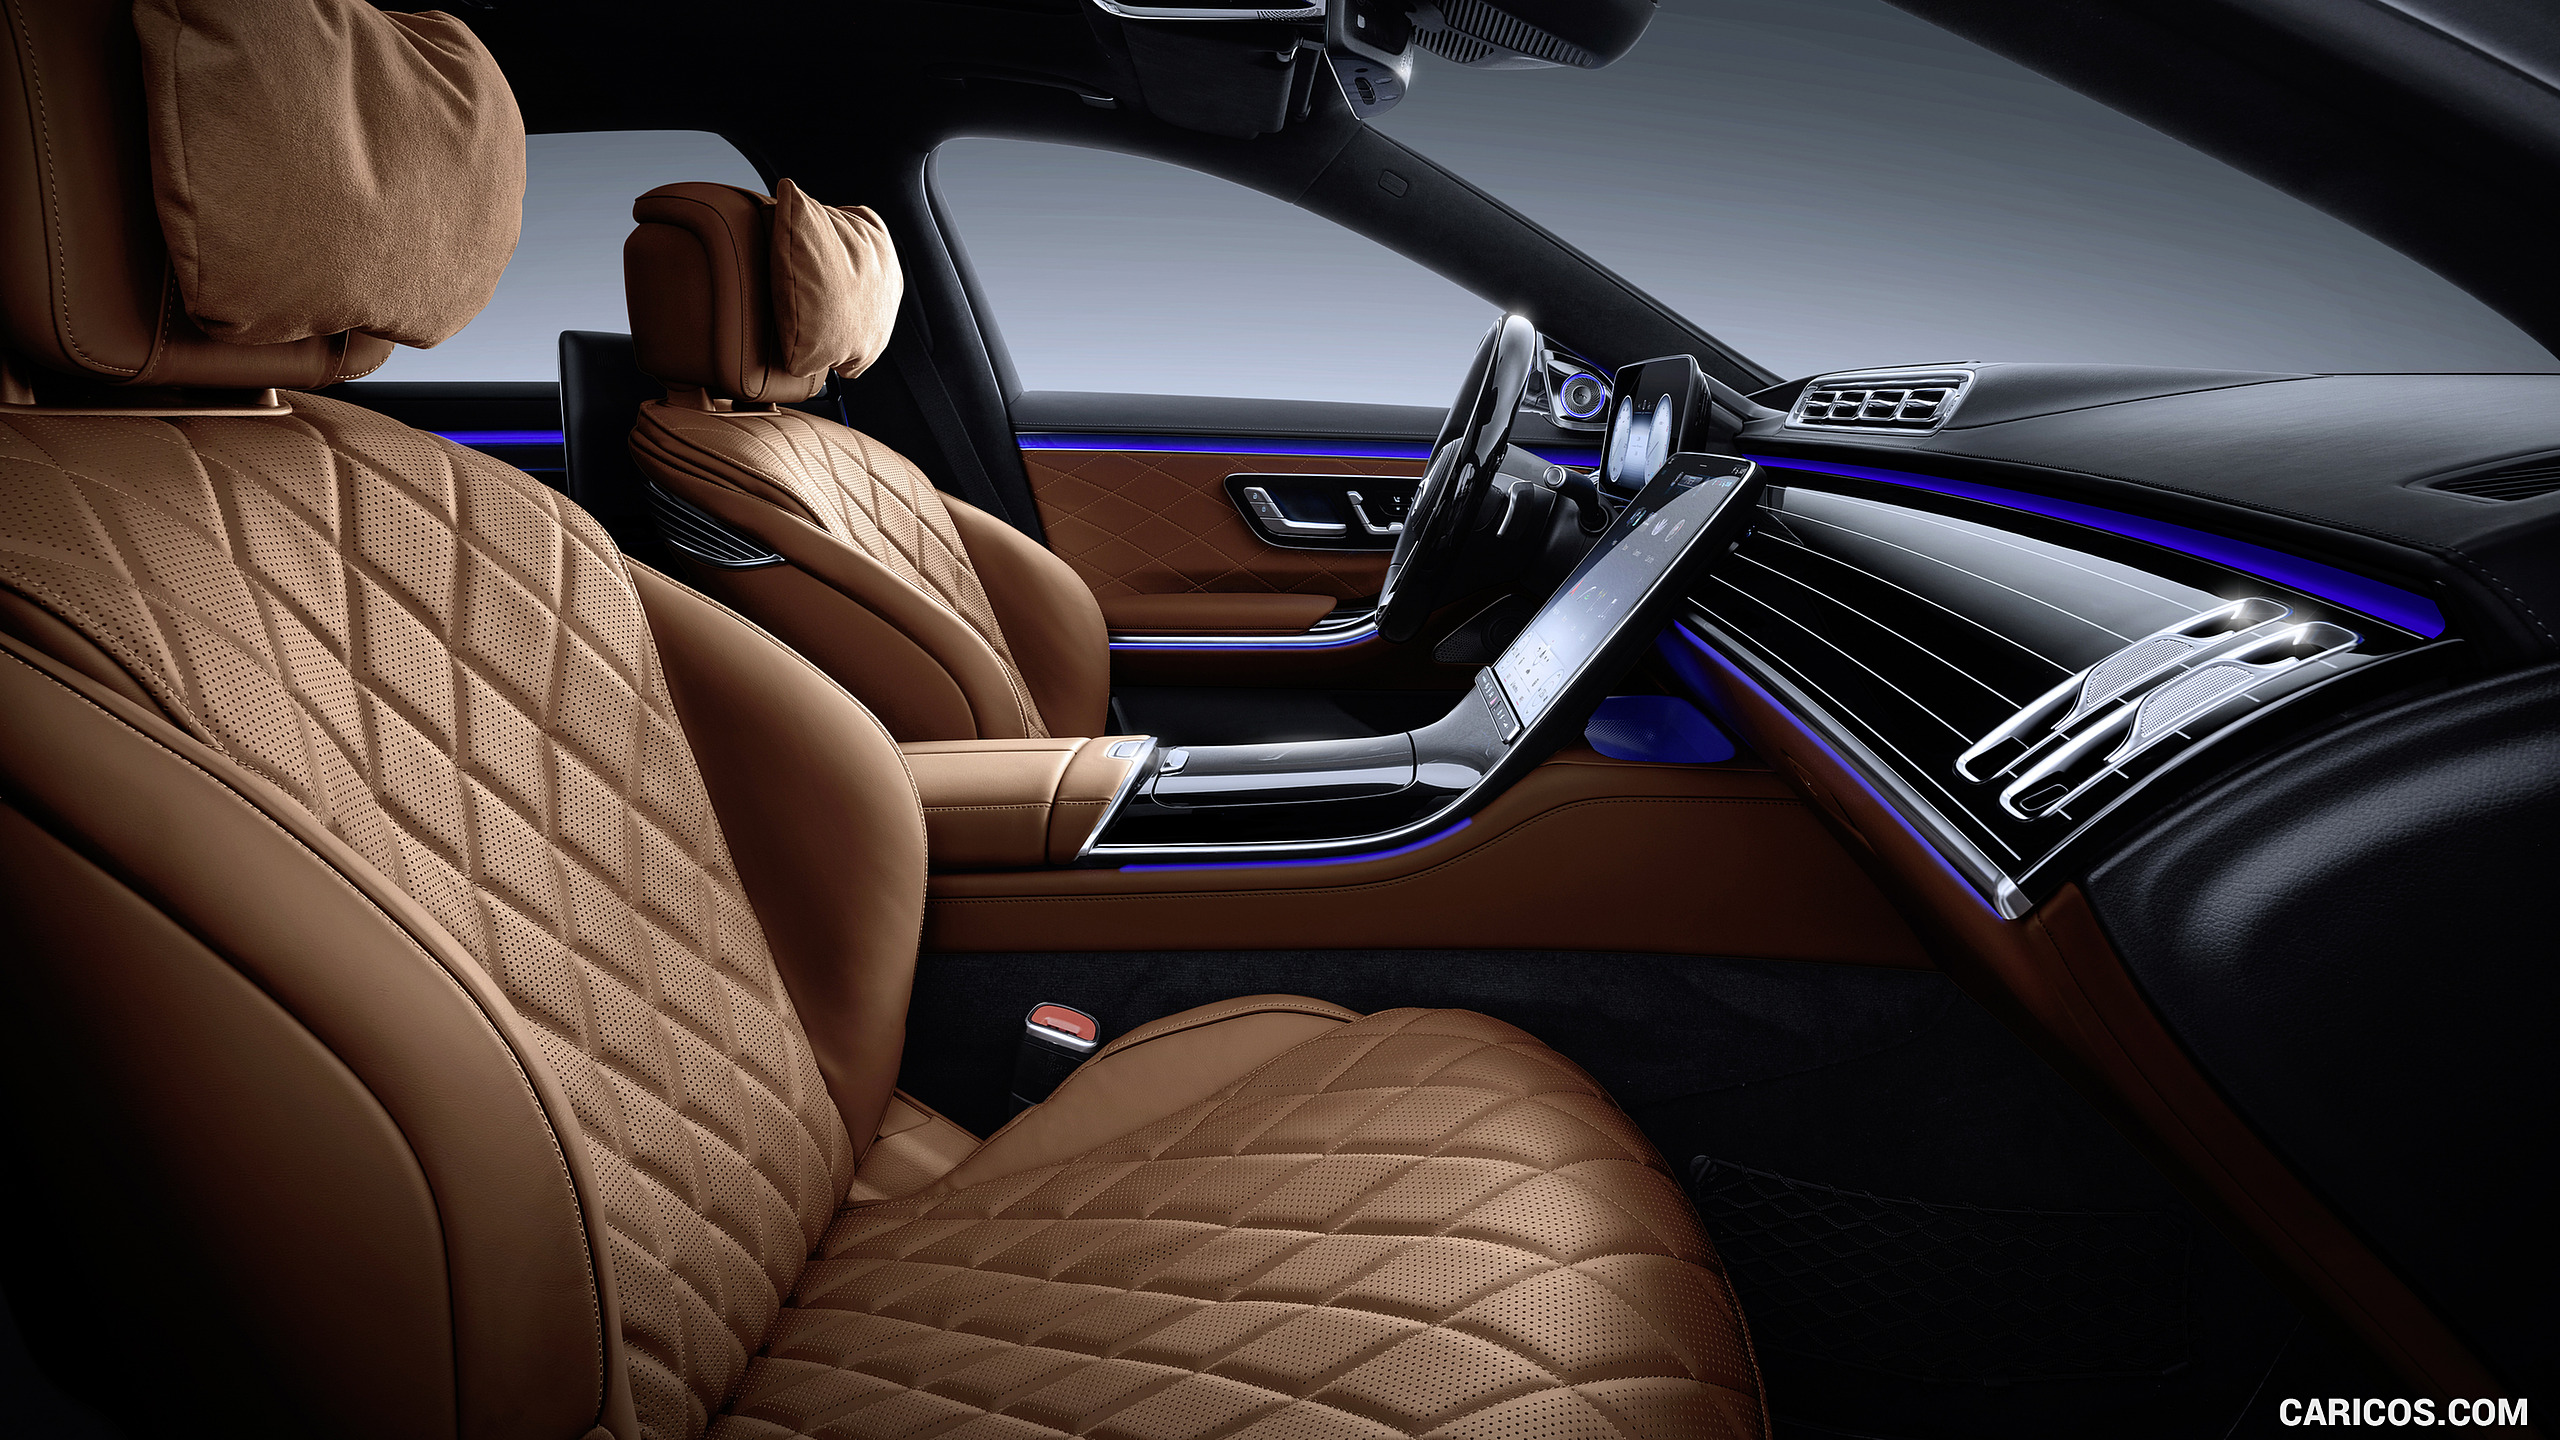 2021 Mercedes-Benz S-Class (Color: Leather Siena Brown) - Interior, Front Seats, #132 of 316